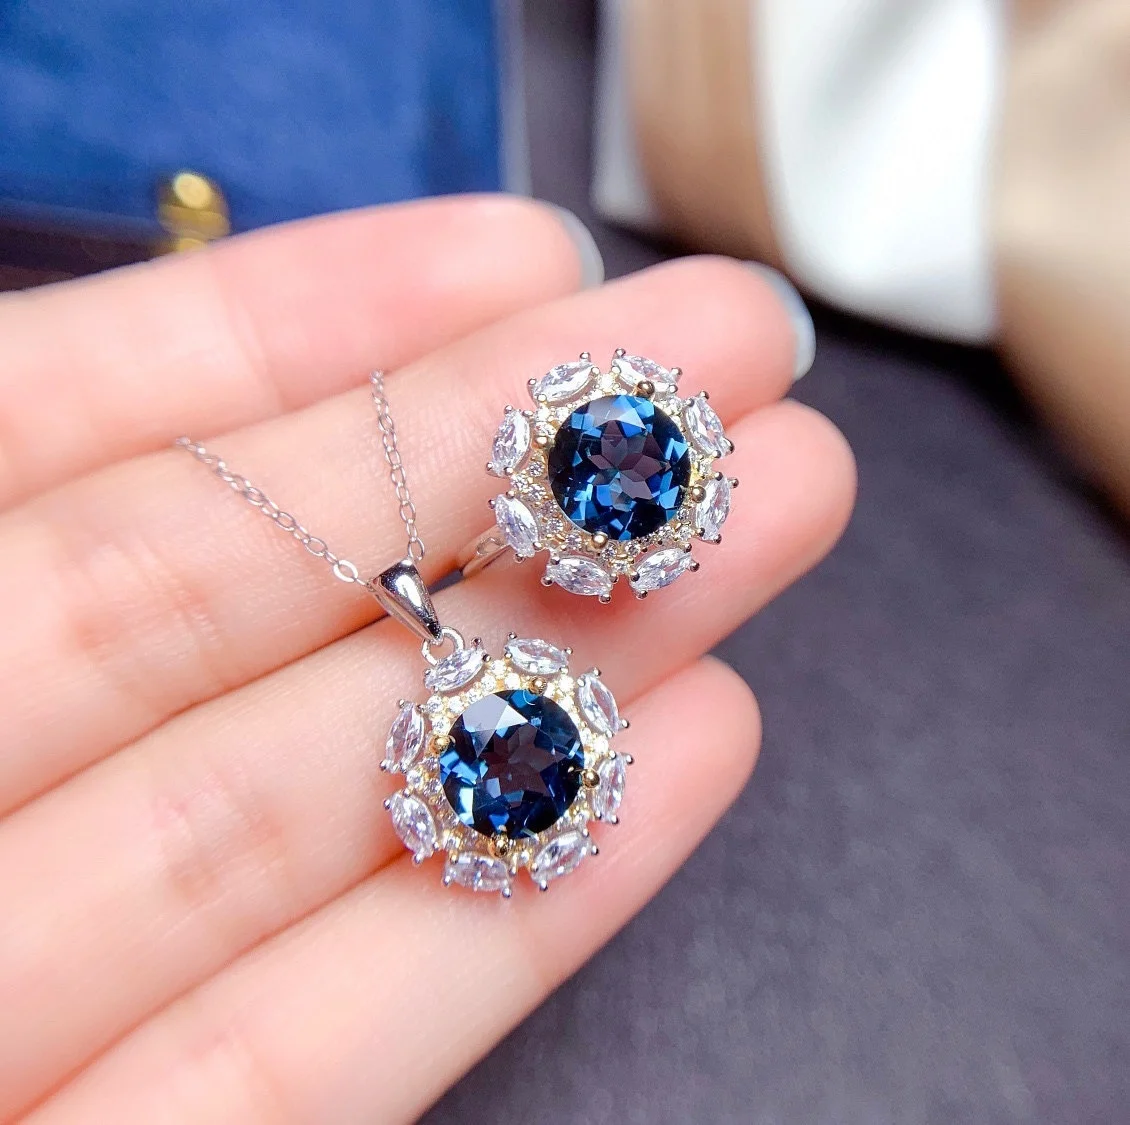 

New Sky Blue Topaz Jewelry Set Inlaid Gemstone Ring Pendant for Women Choker Firework Cut Two-Color Plating Necklace, Picture shows